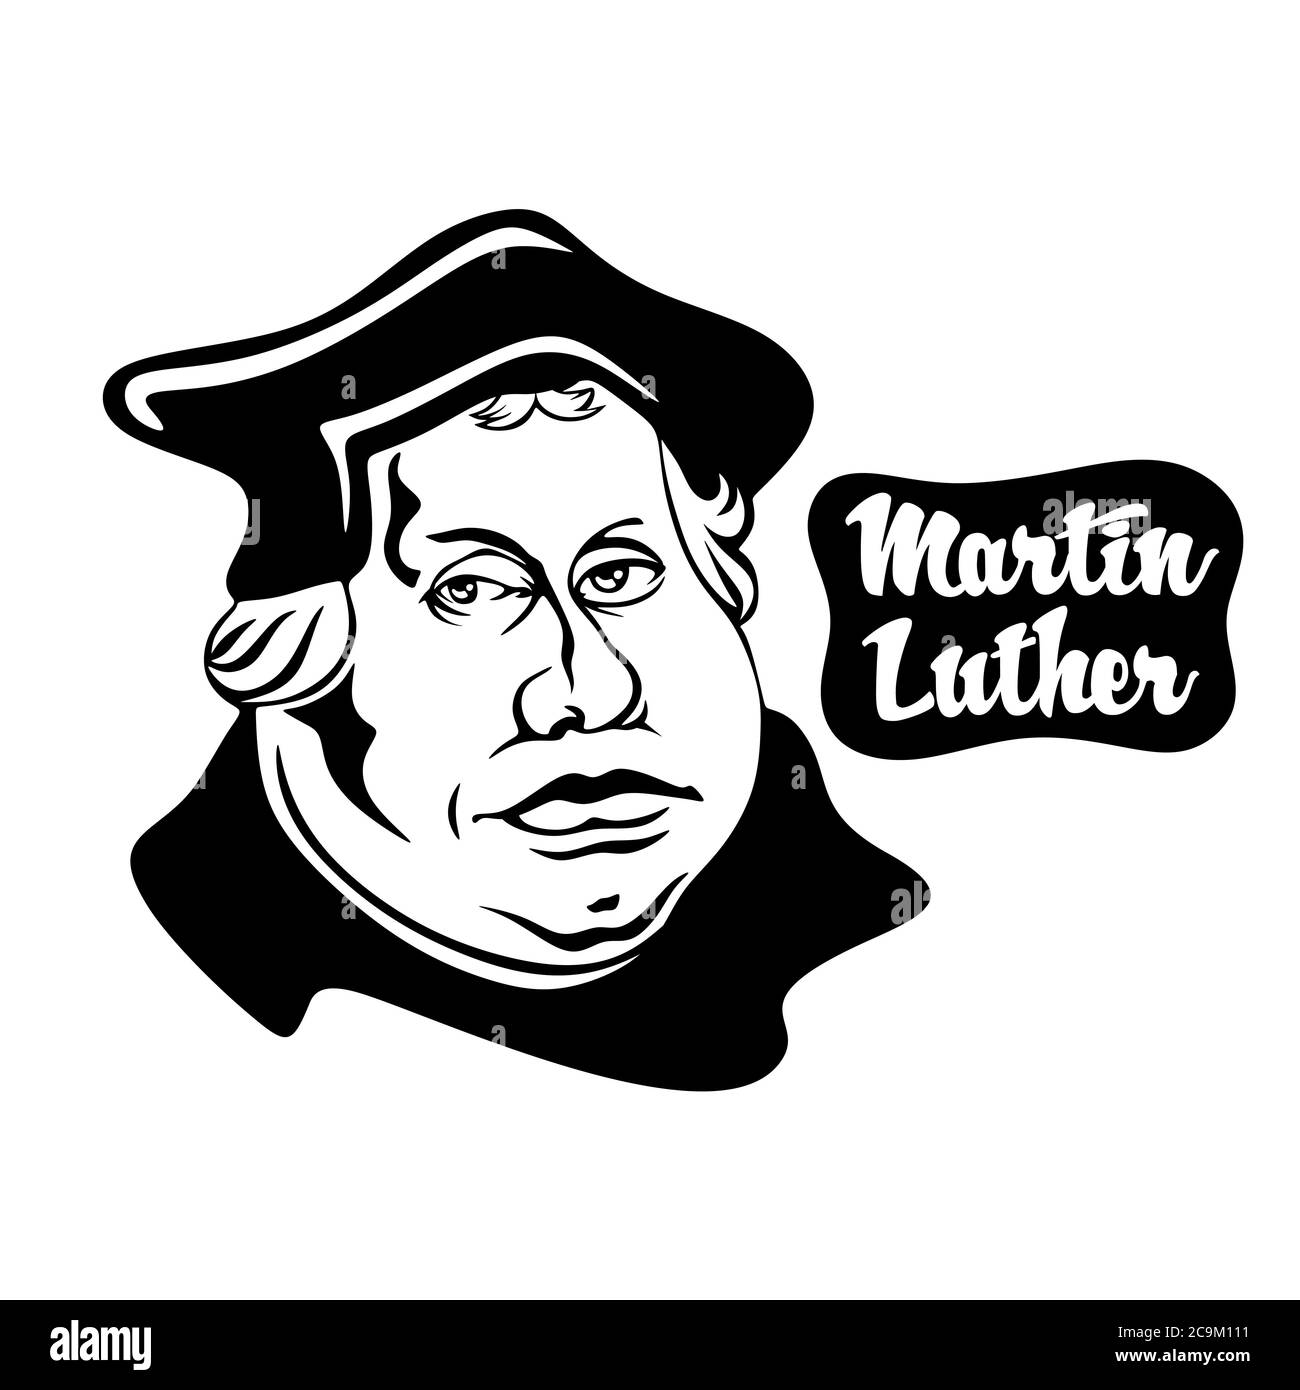 Cartoon on Martin Luther. One of the leaders of the European Christian Reformation. Stock Vector